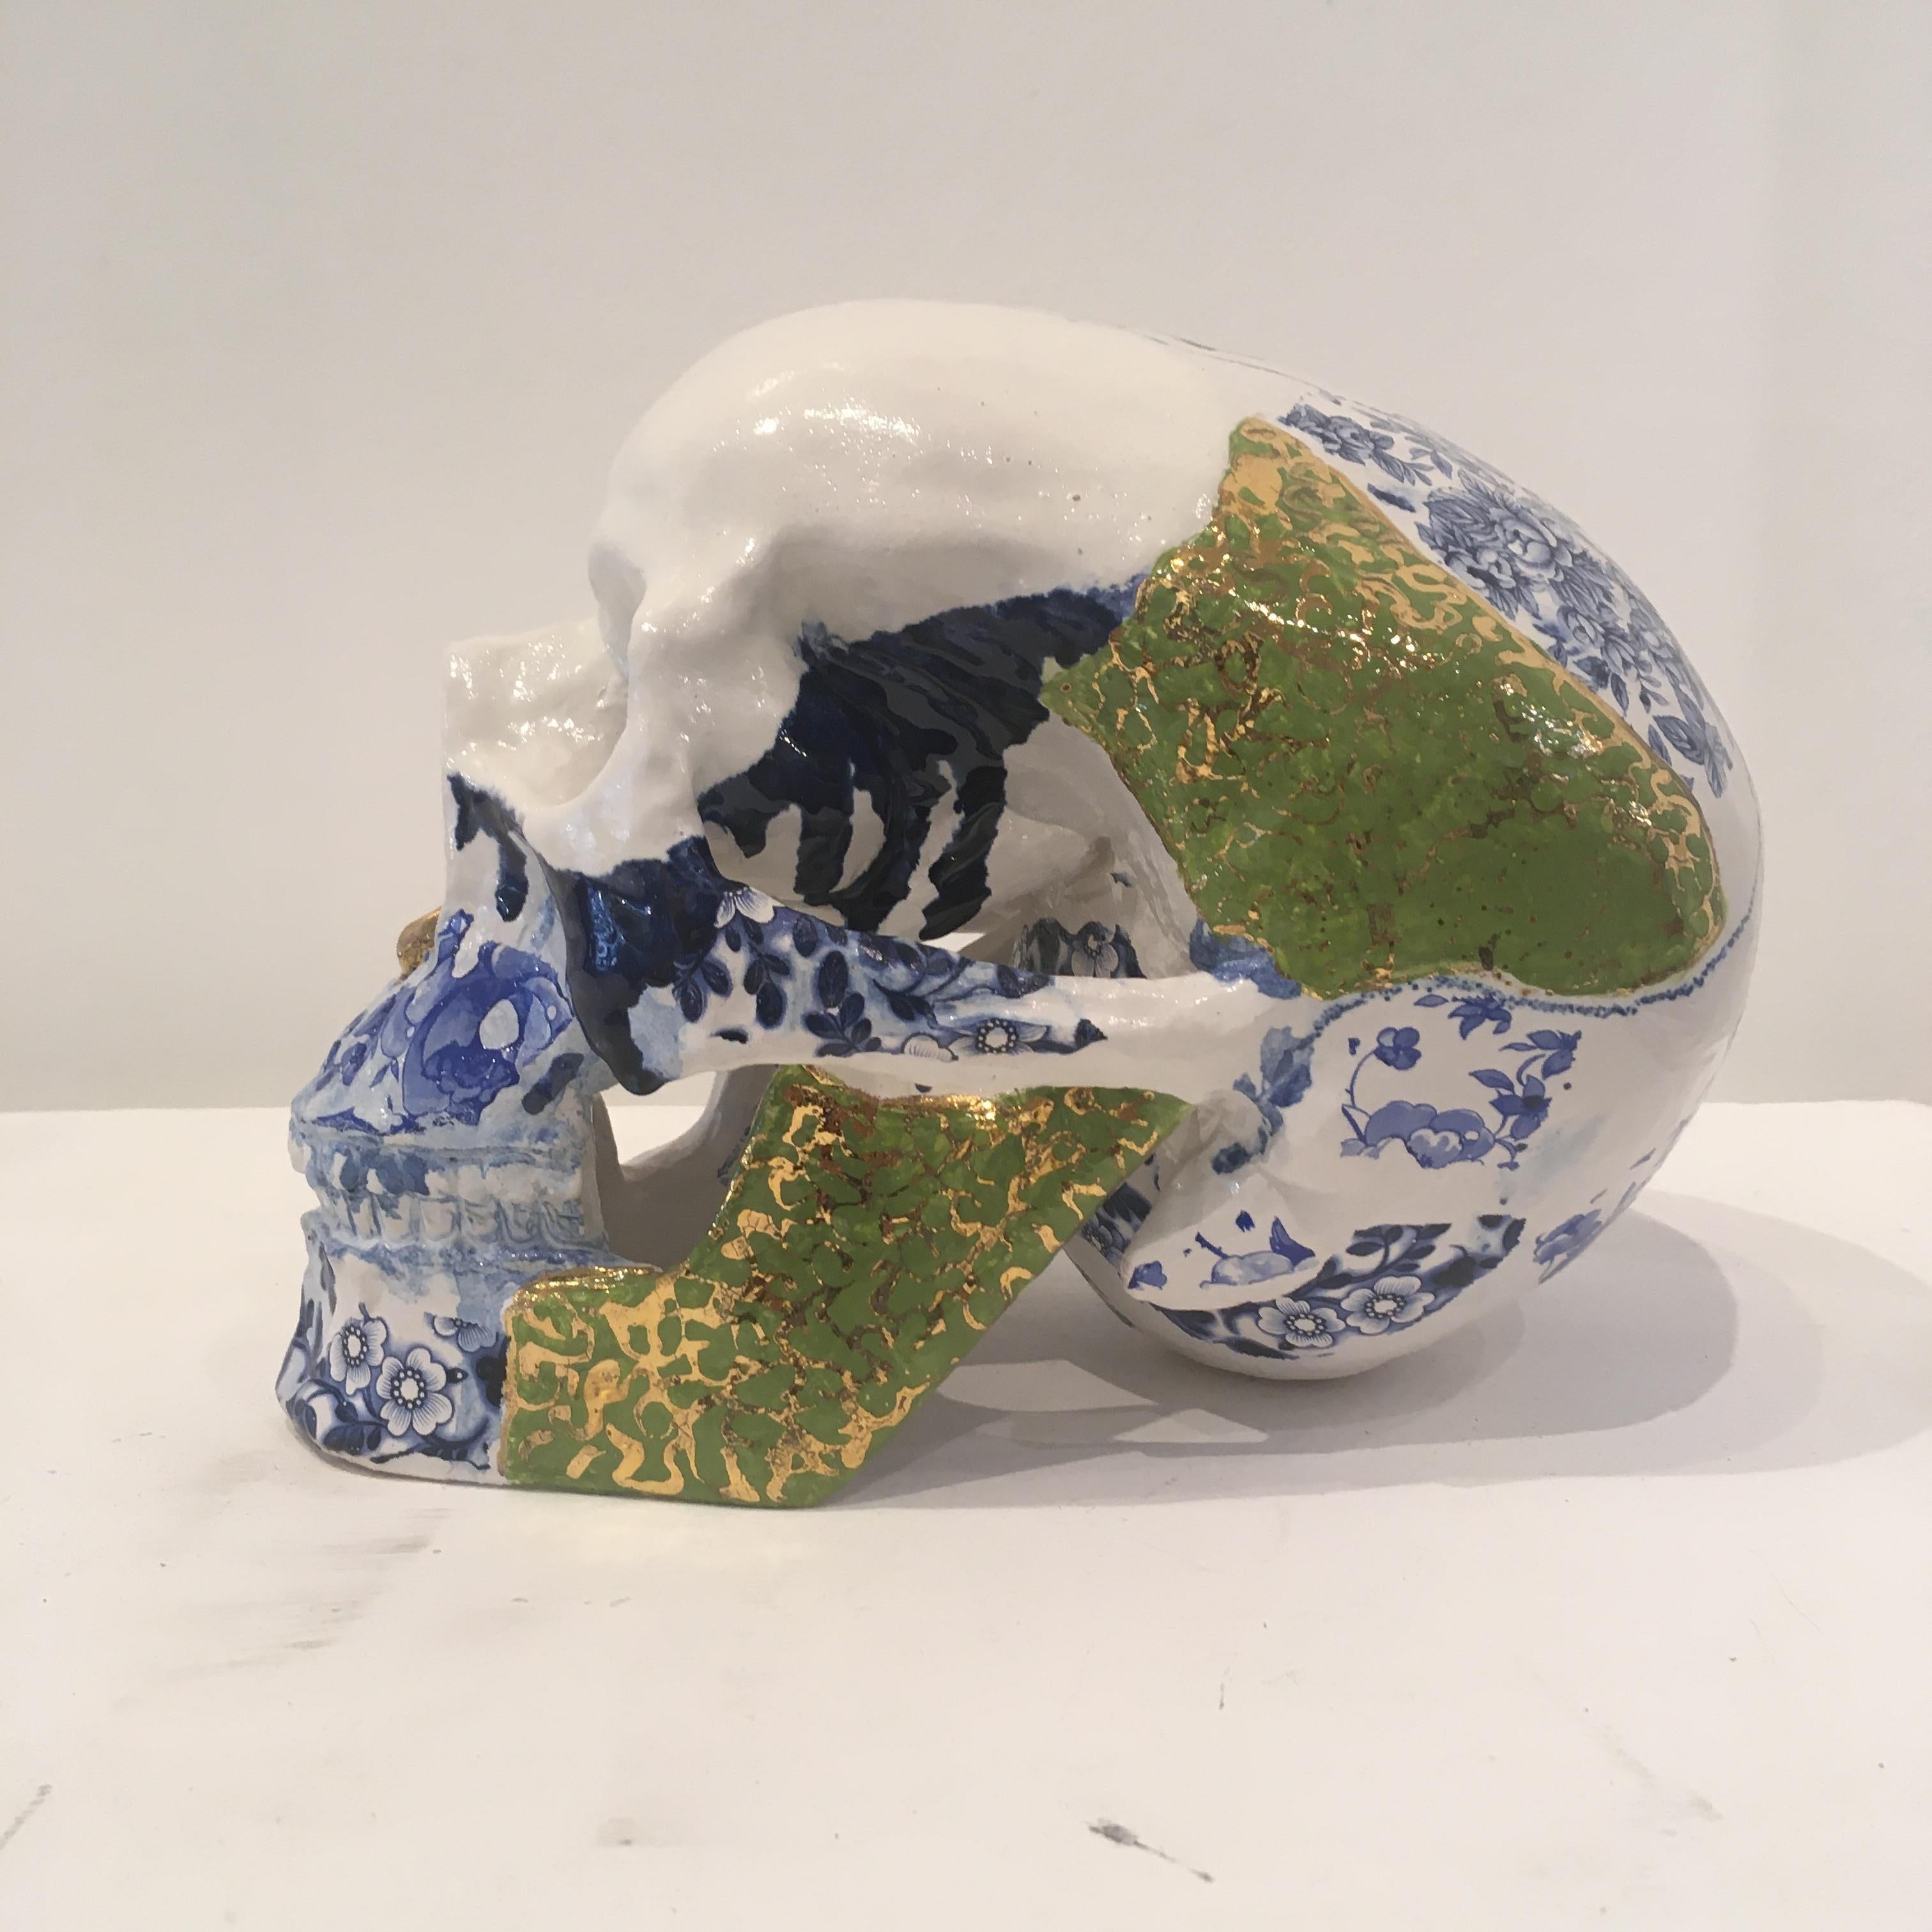 Pierre’s work is a contemporary reworking of traditional sculptural art, which includes the human figure, skulls and horses combined with architectural forms or thrown vessels. He also works in themed series within the main framework of what he